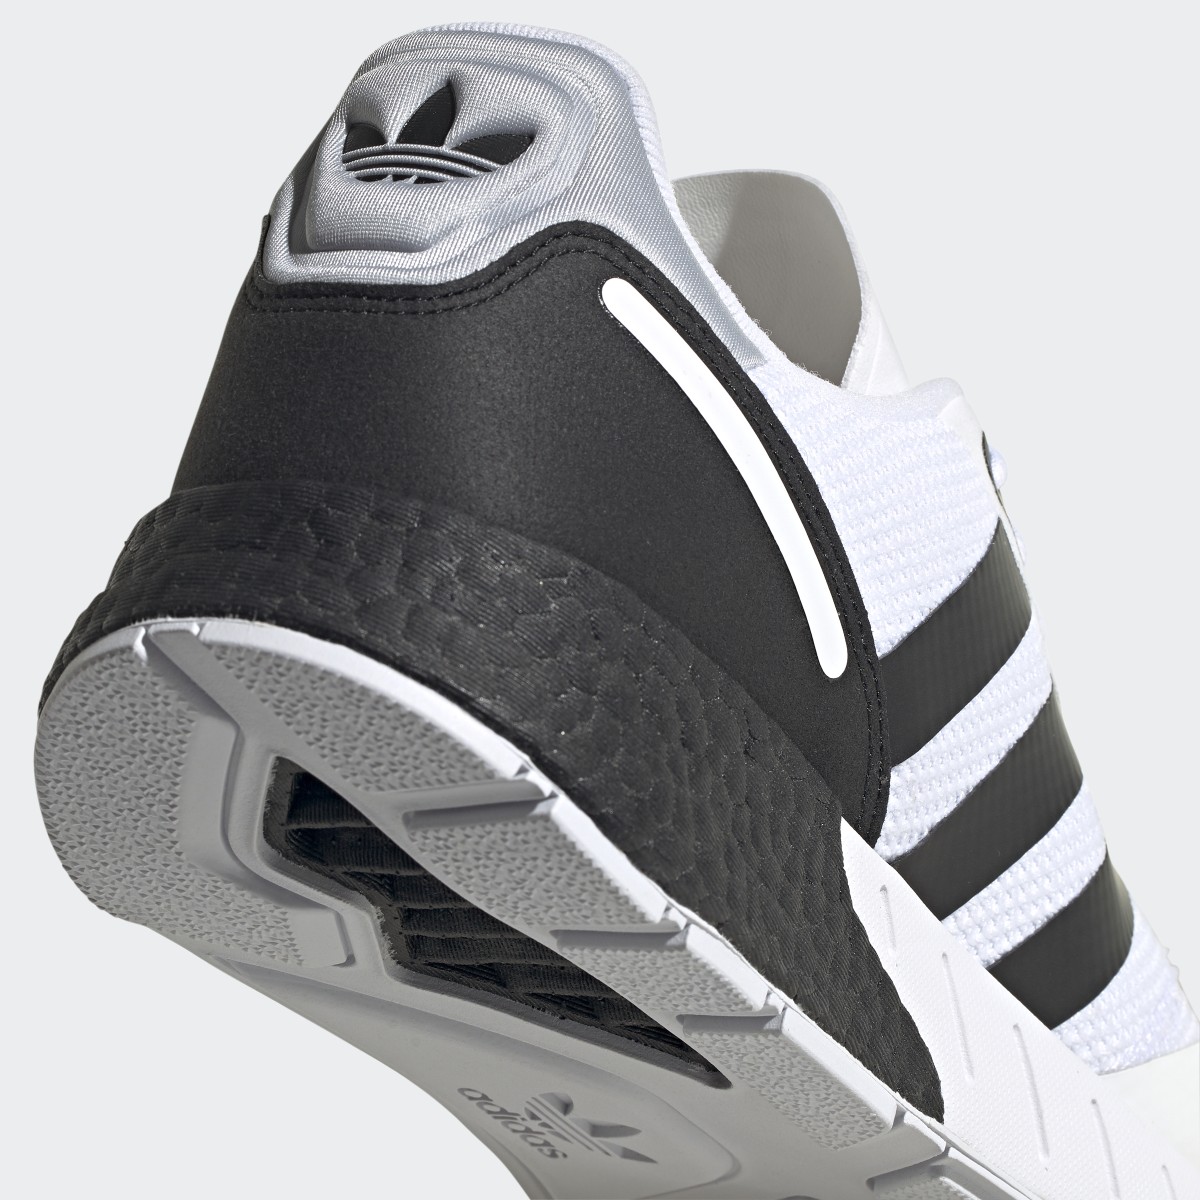 Adidas ZX 1K Boost Shoes. 10